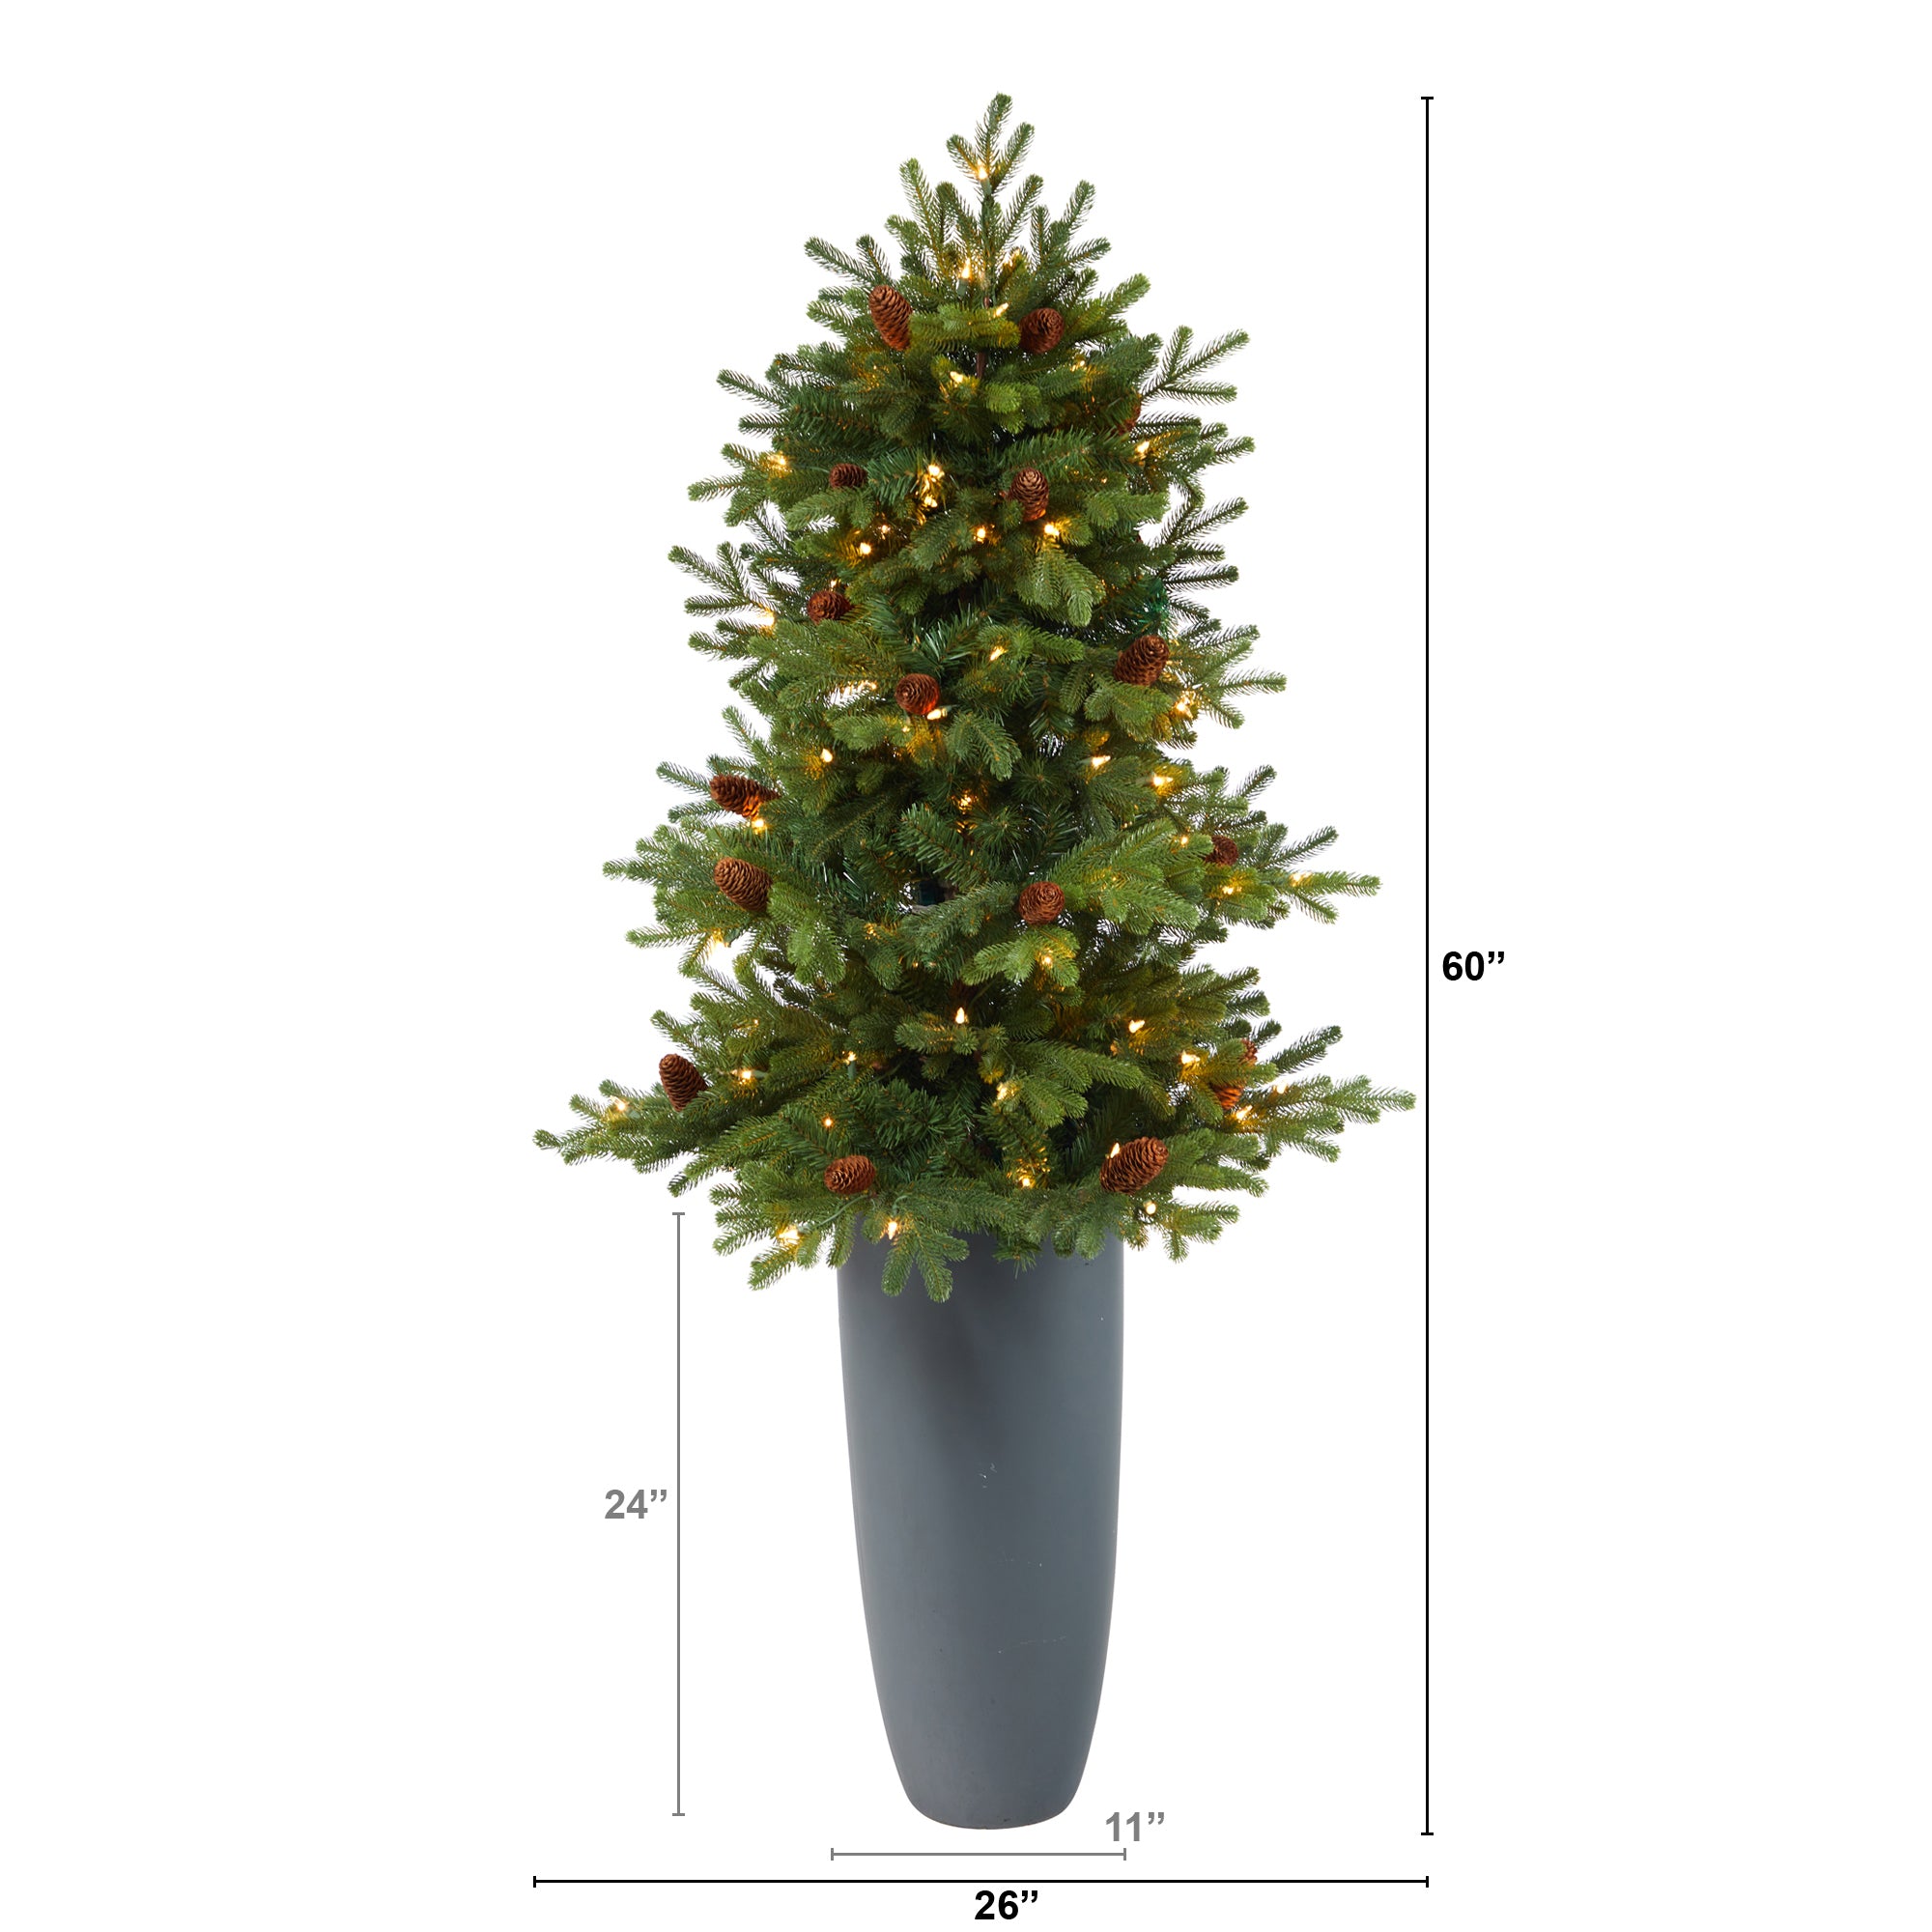 5' Yukon Mountain Fir Artificial Christmas Tree with 100 Clear Lights, Pine Cones and 386 Bendable Branches in Gray Planter